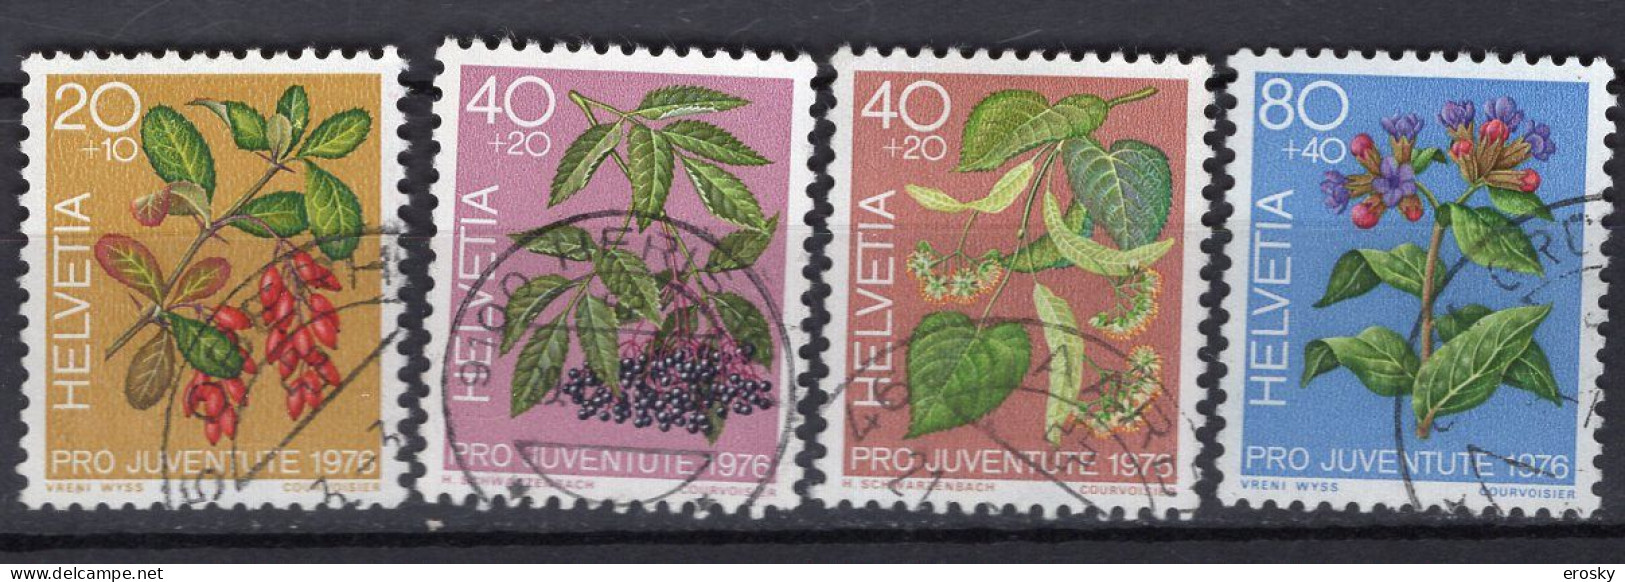 T3031 - SUISSE SWITZERLAND Yv N°1013/13 Pro Juventute - Used Stamps